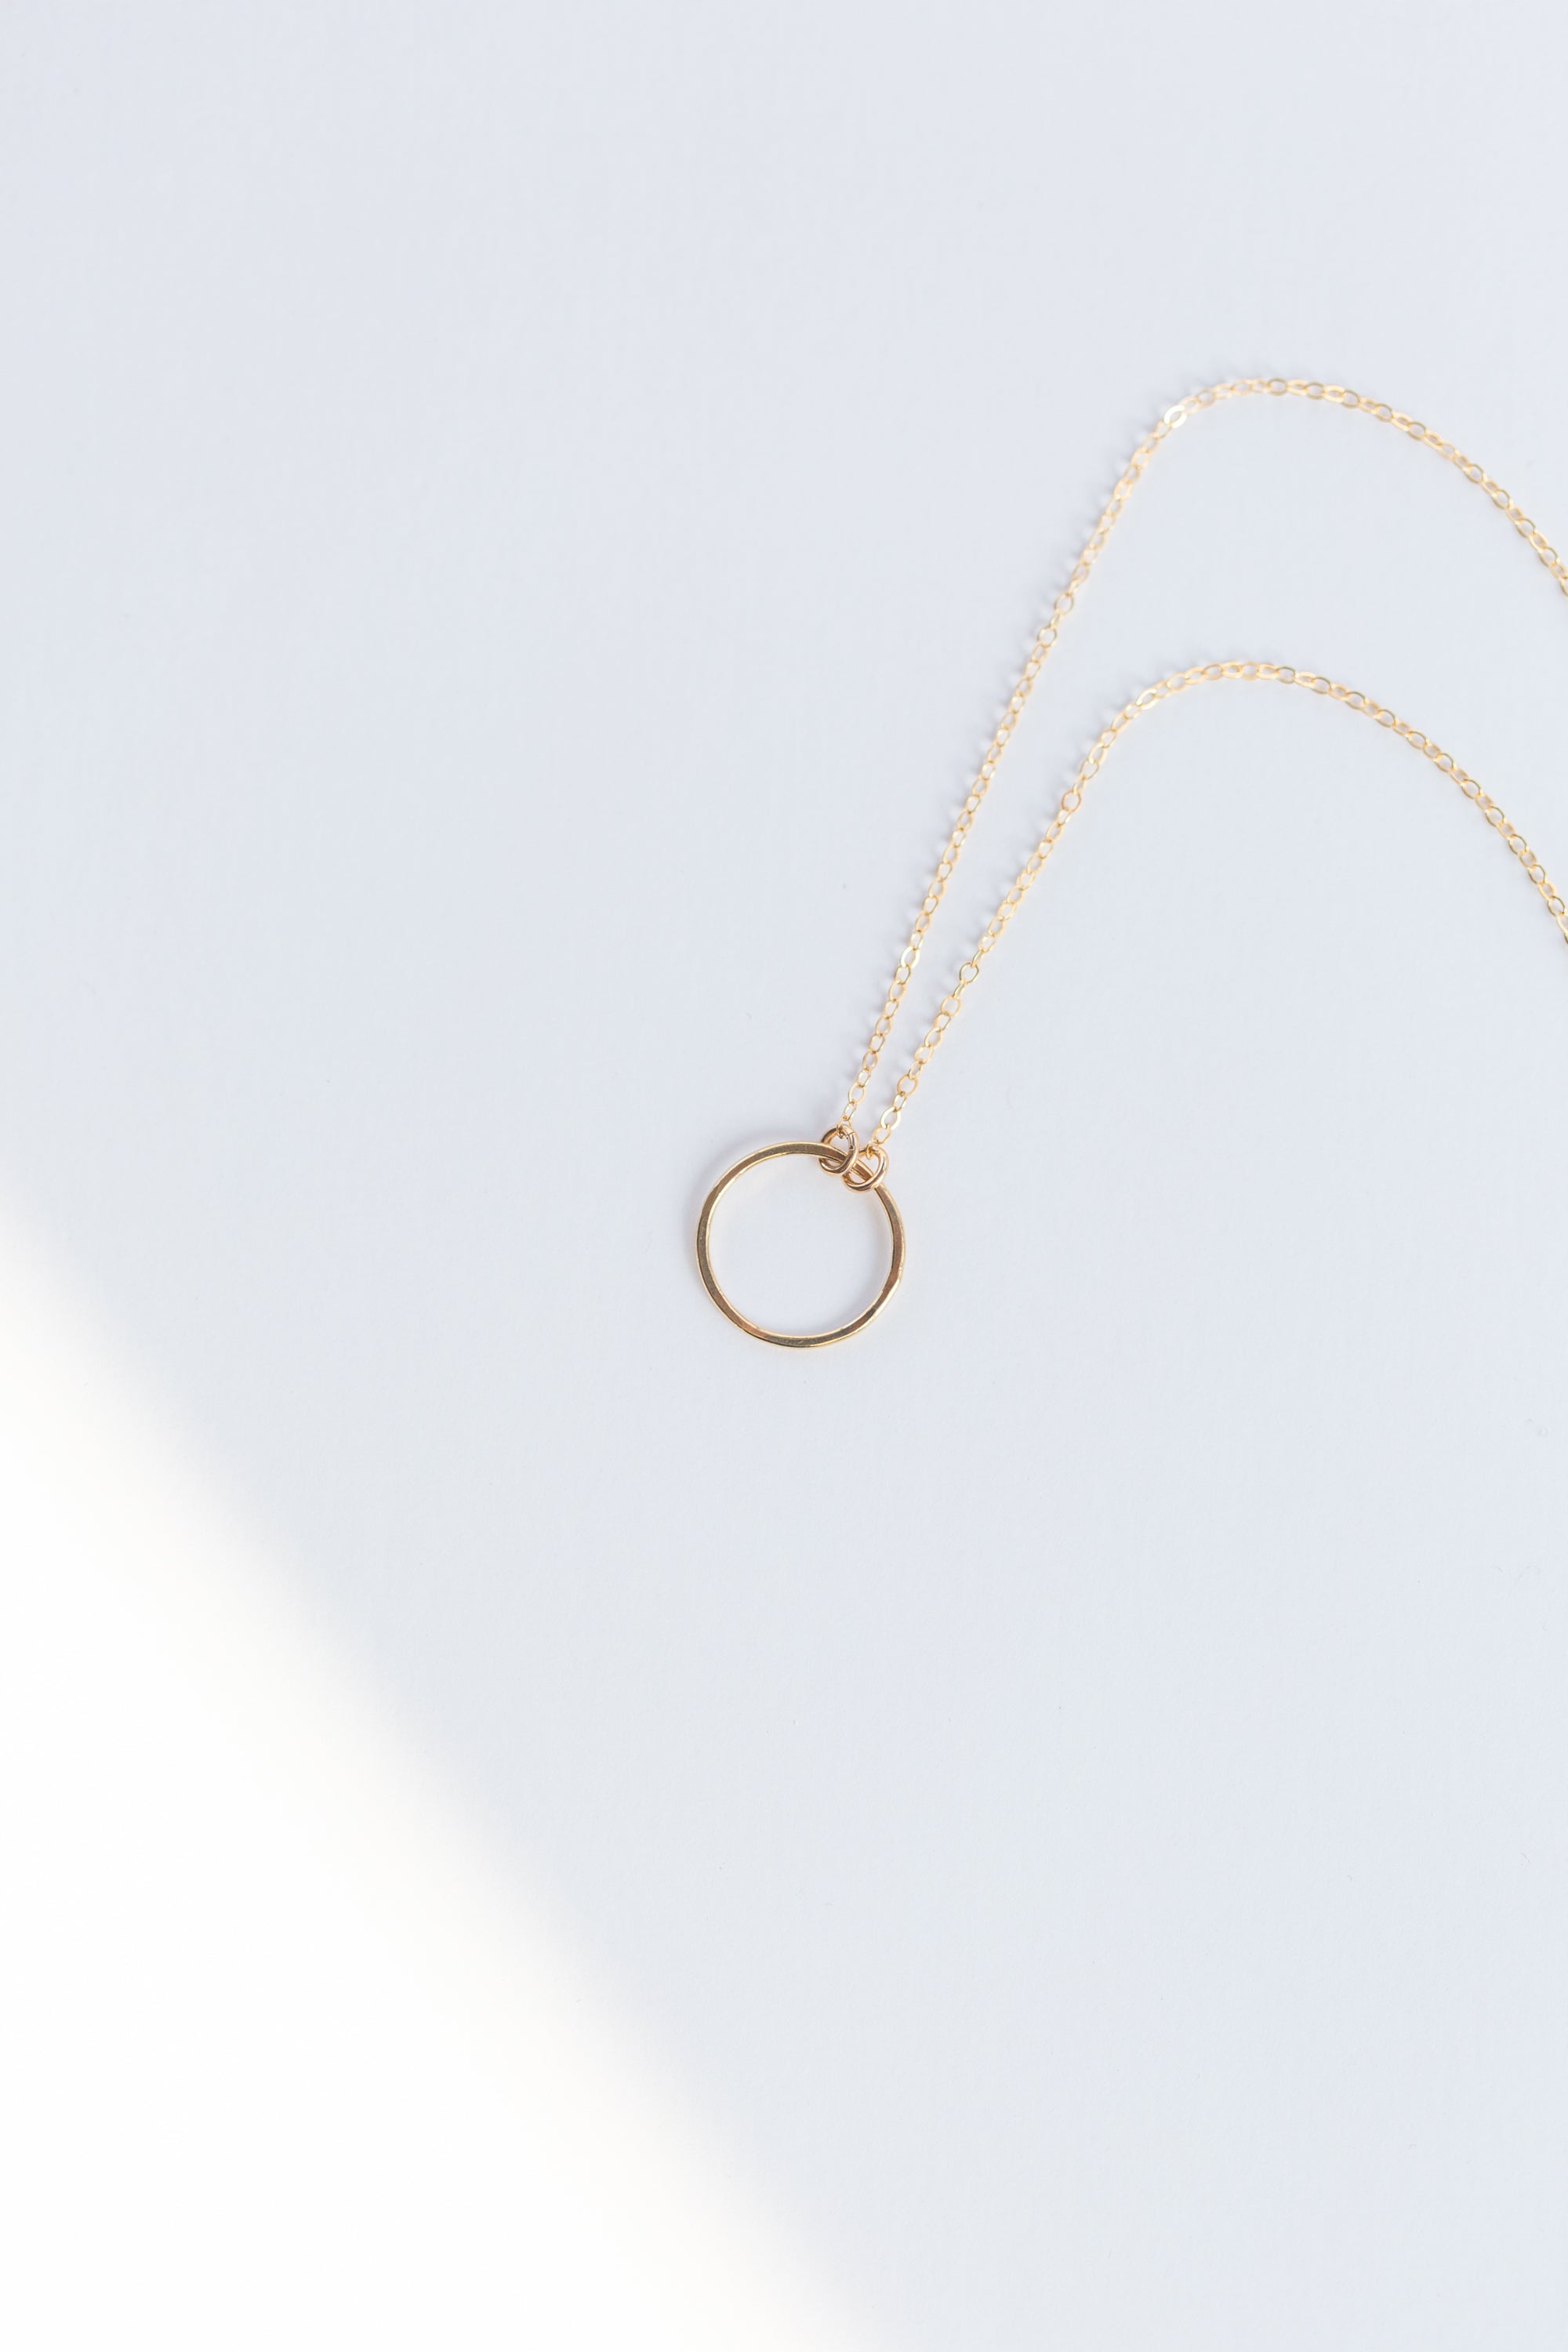 Full Circle Necklace - 14k Gold Fill